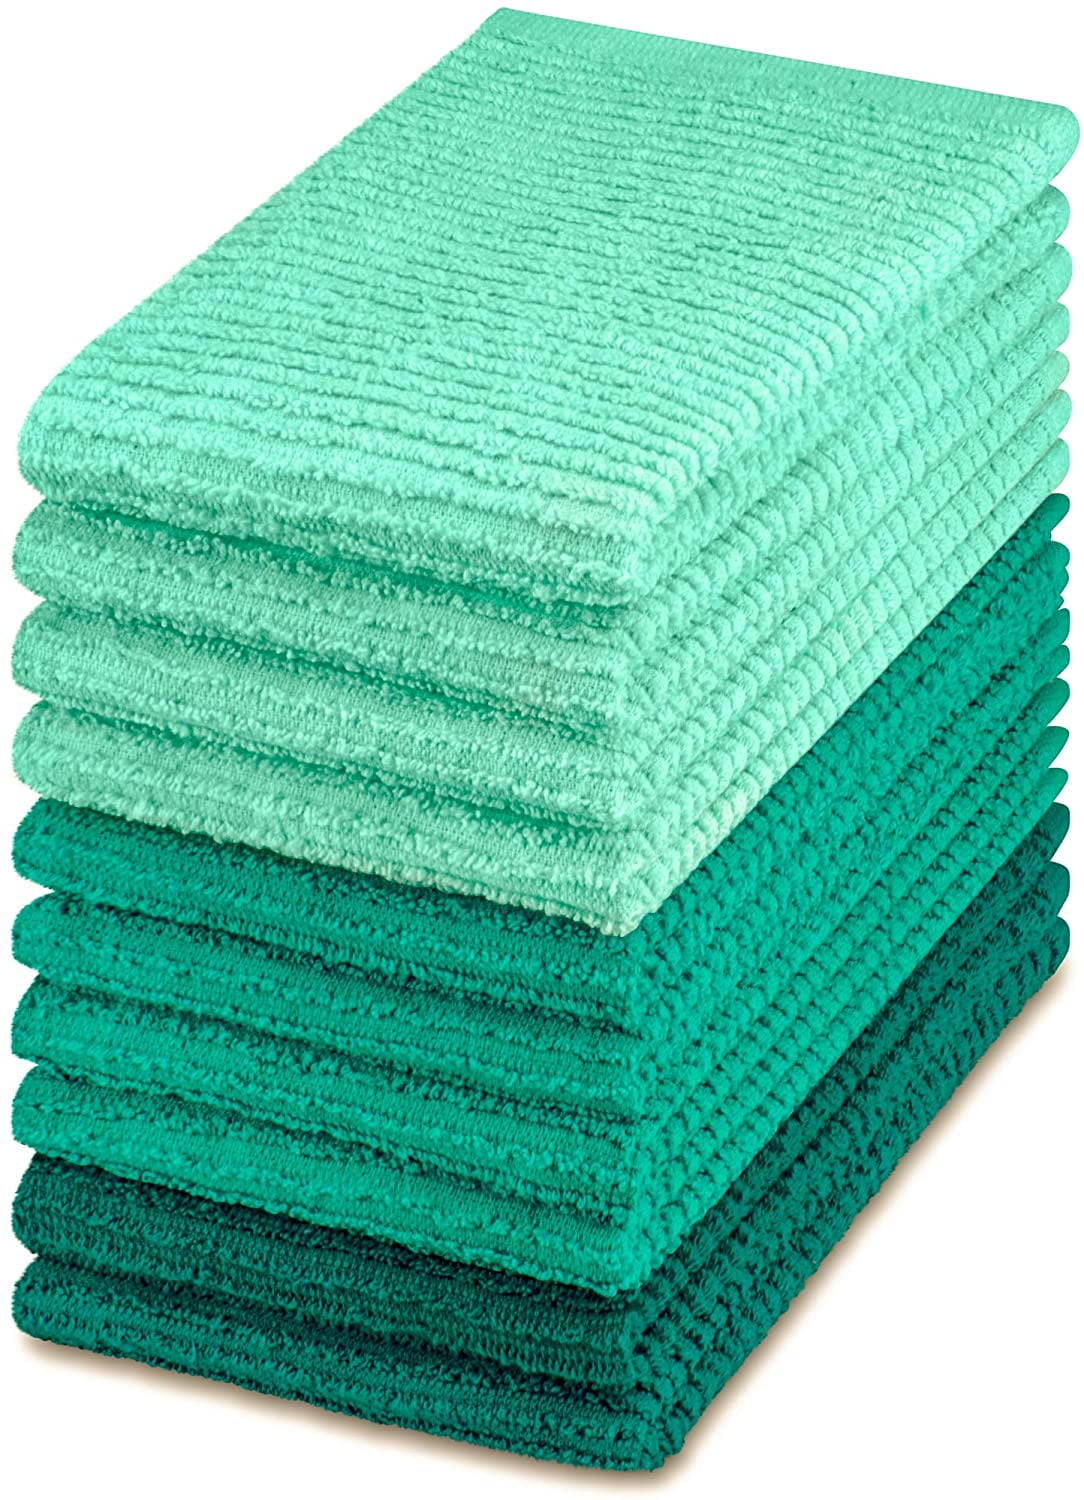 DecorRack 10 Pack 100% Cotton Bar Mop, 16 x 19 inch, Ultra Absorbent, Heavy  Duty Kitchen Cleaning Towels, Assorted Colors (10 Pack)